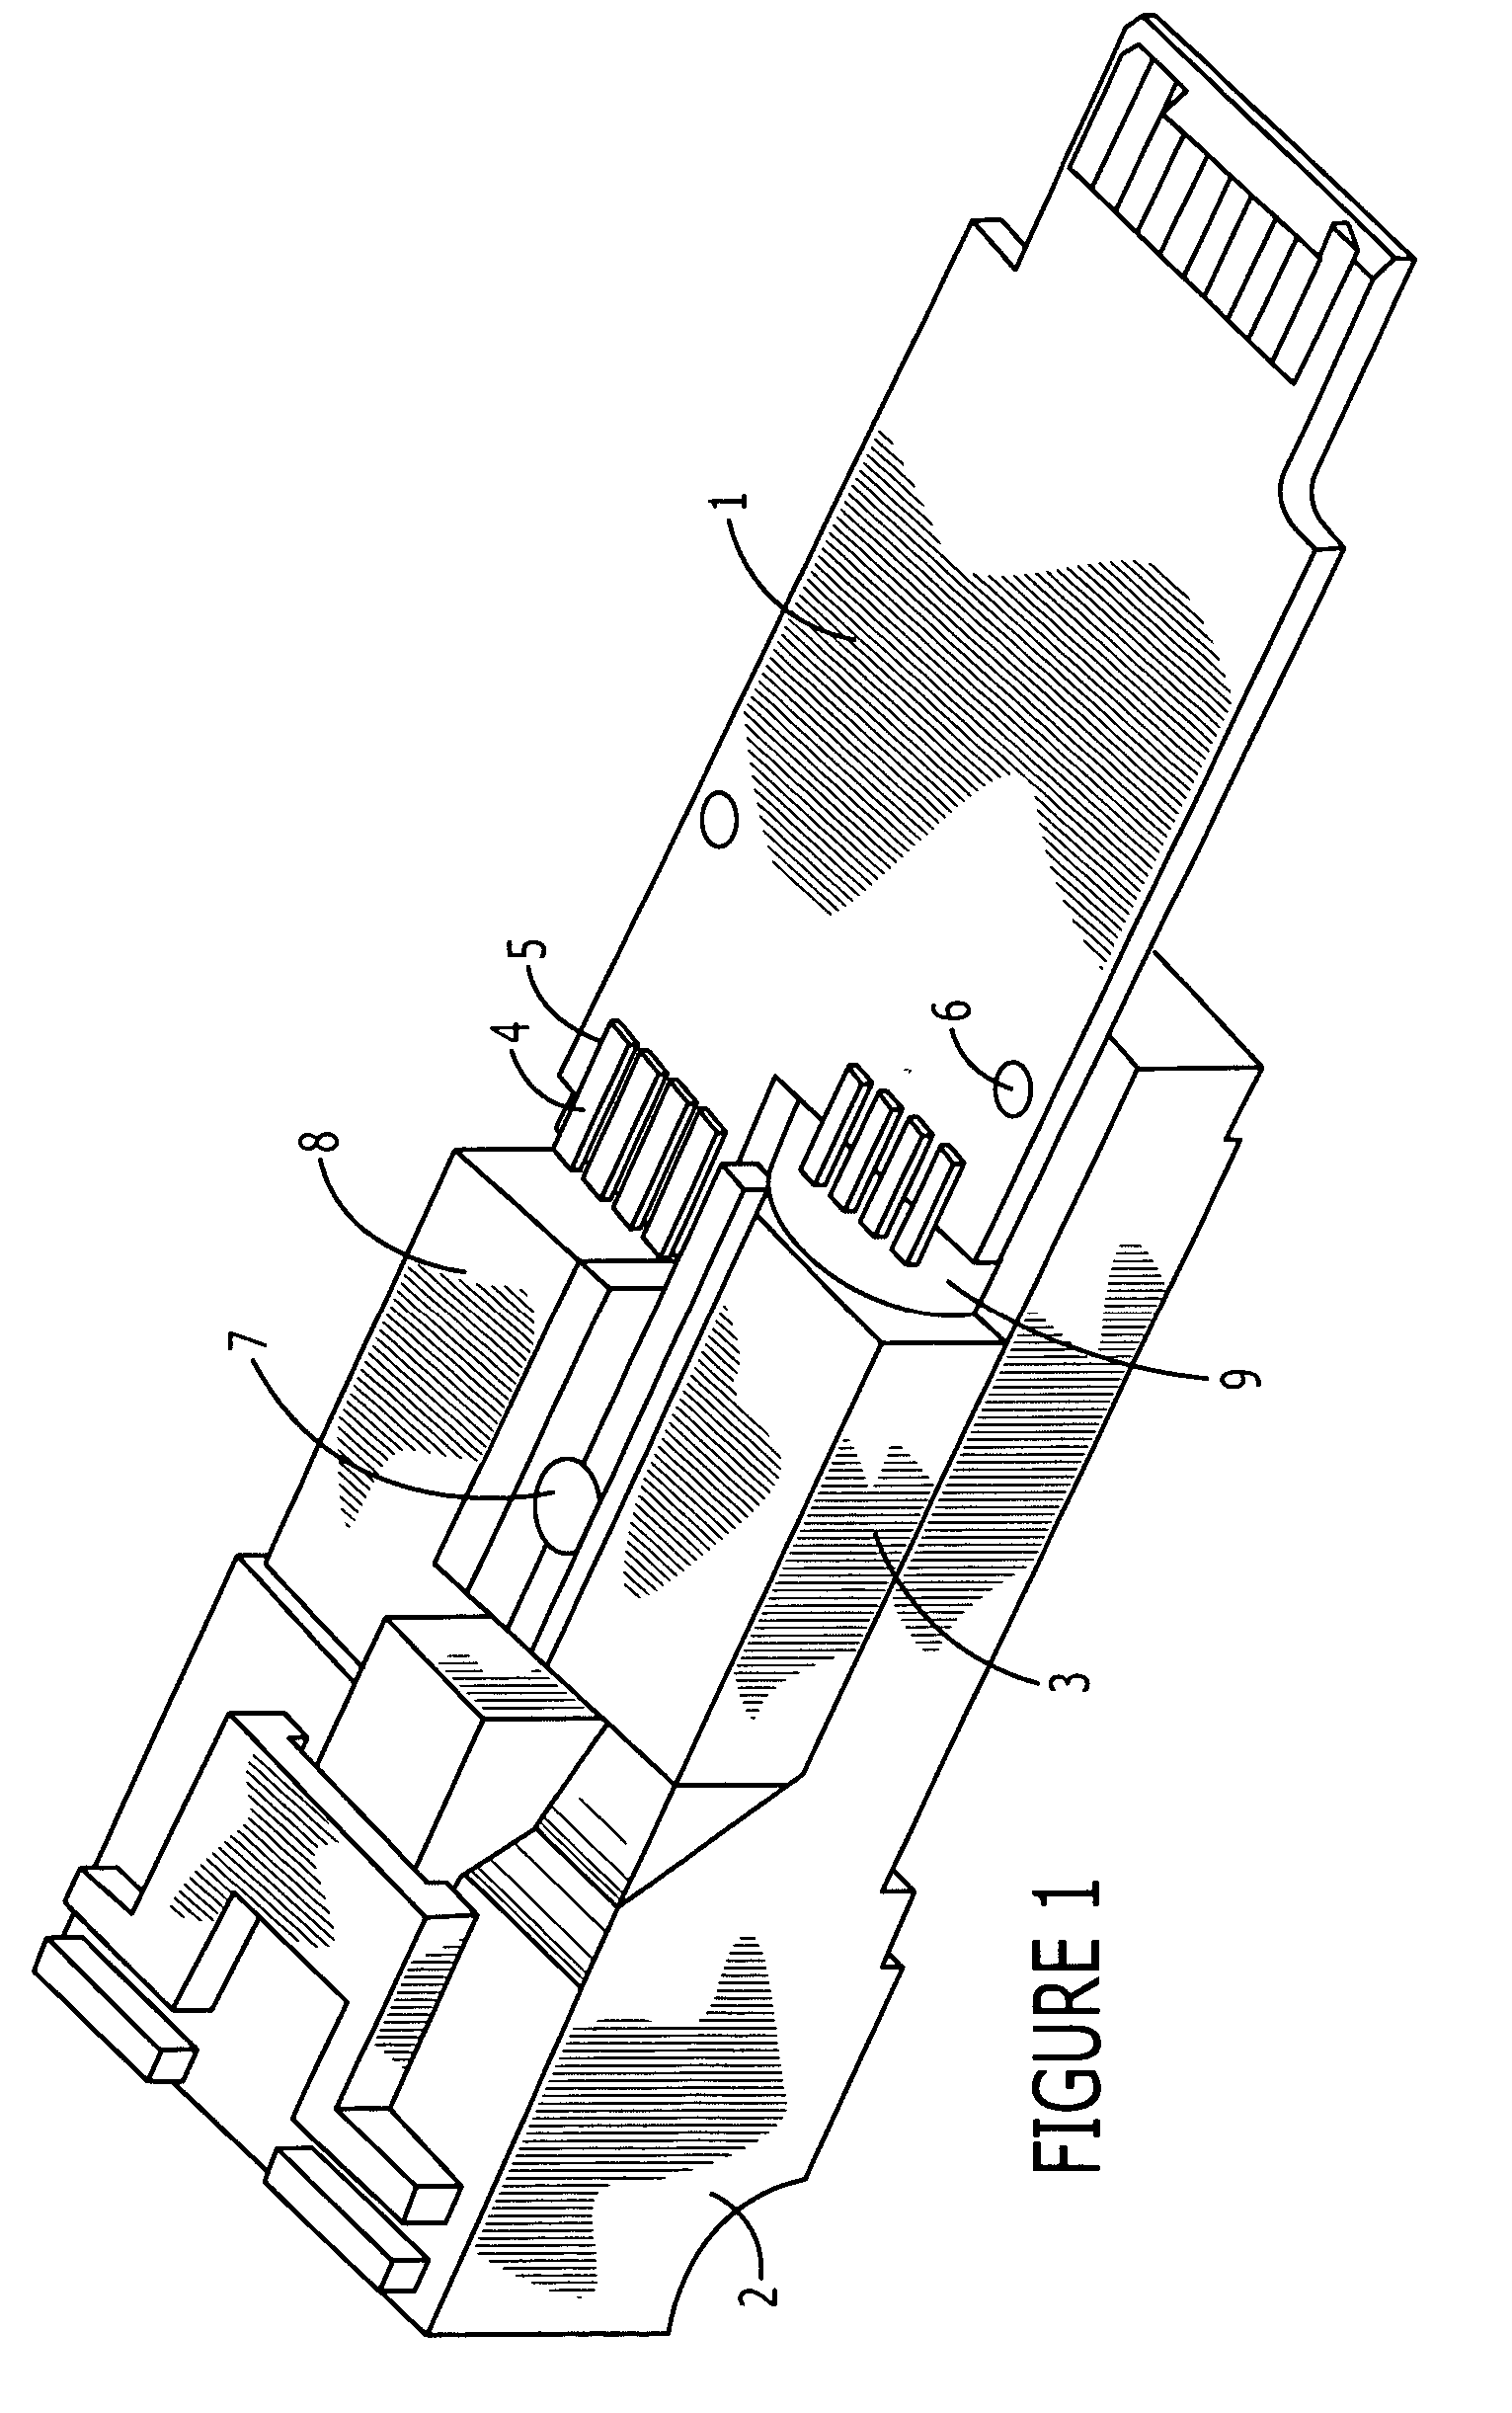 Opto-electric module and method of assembling